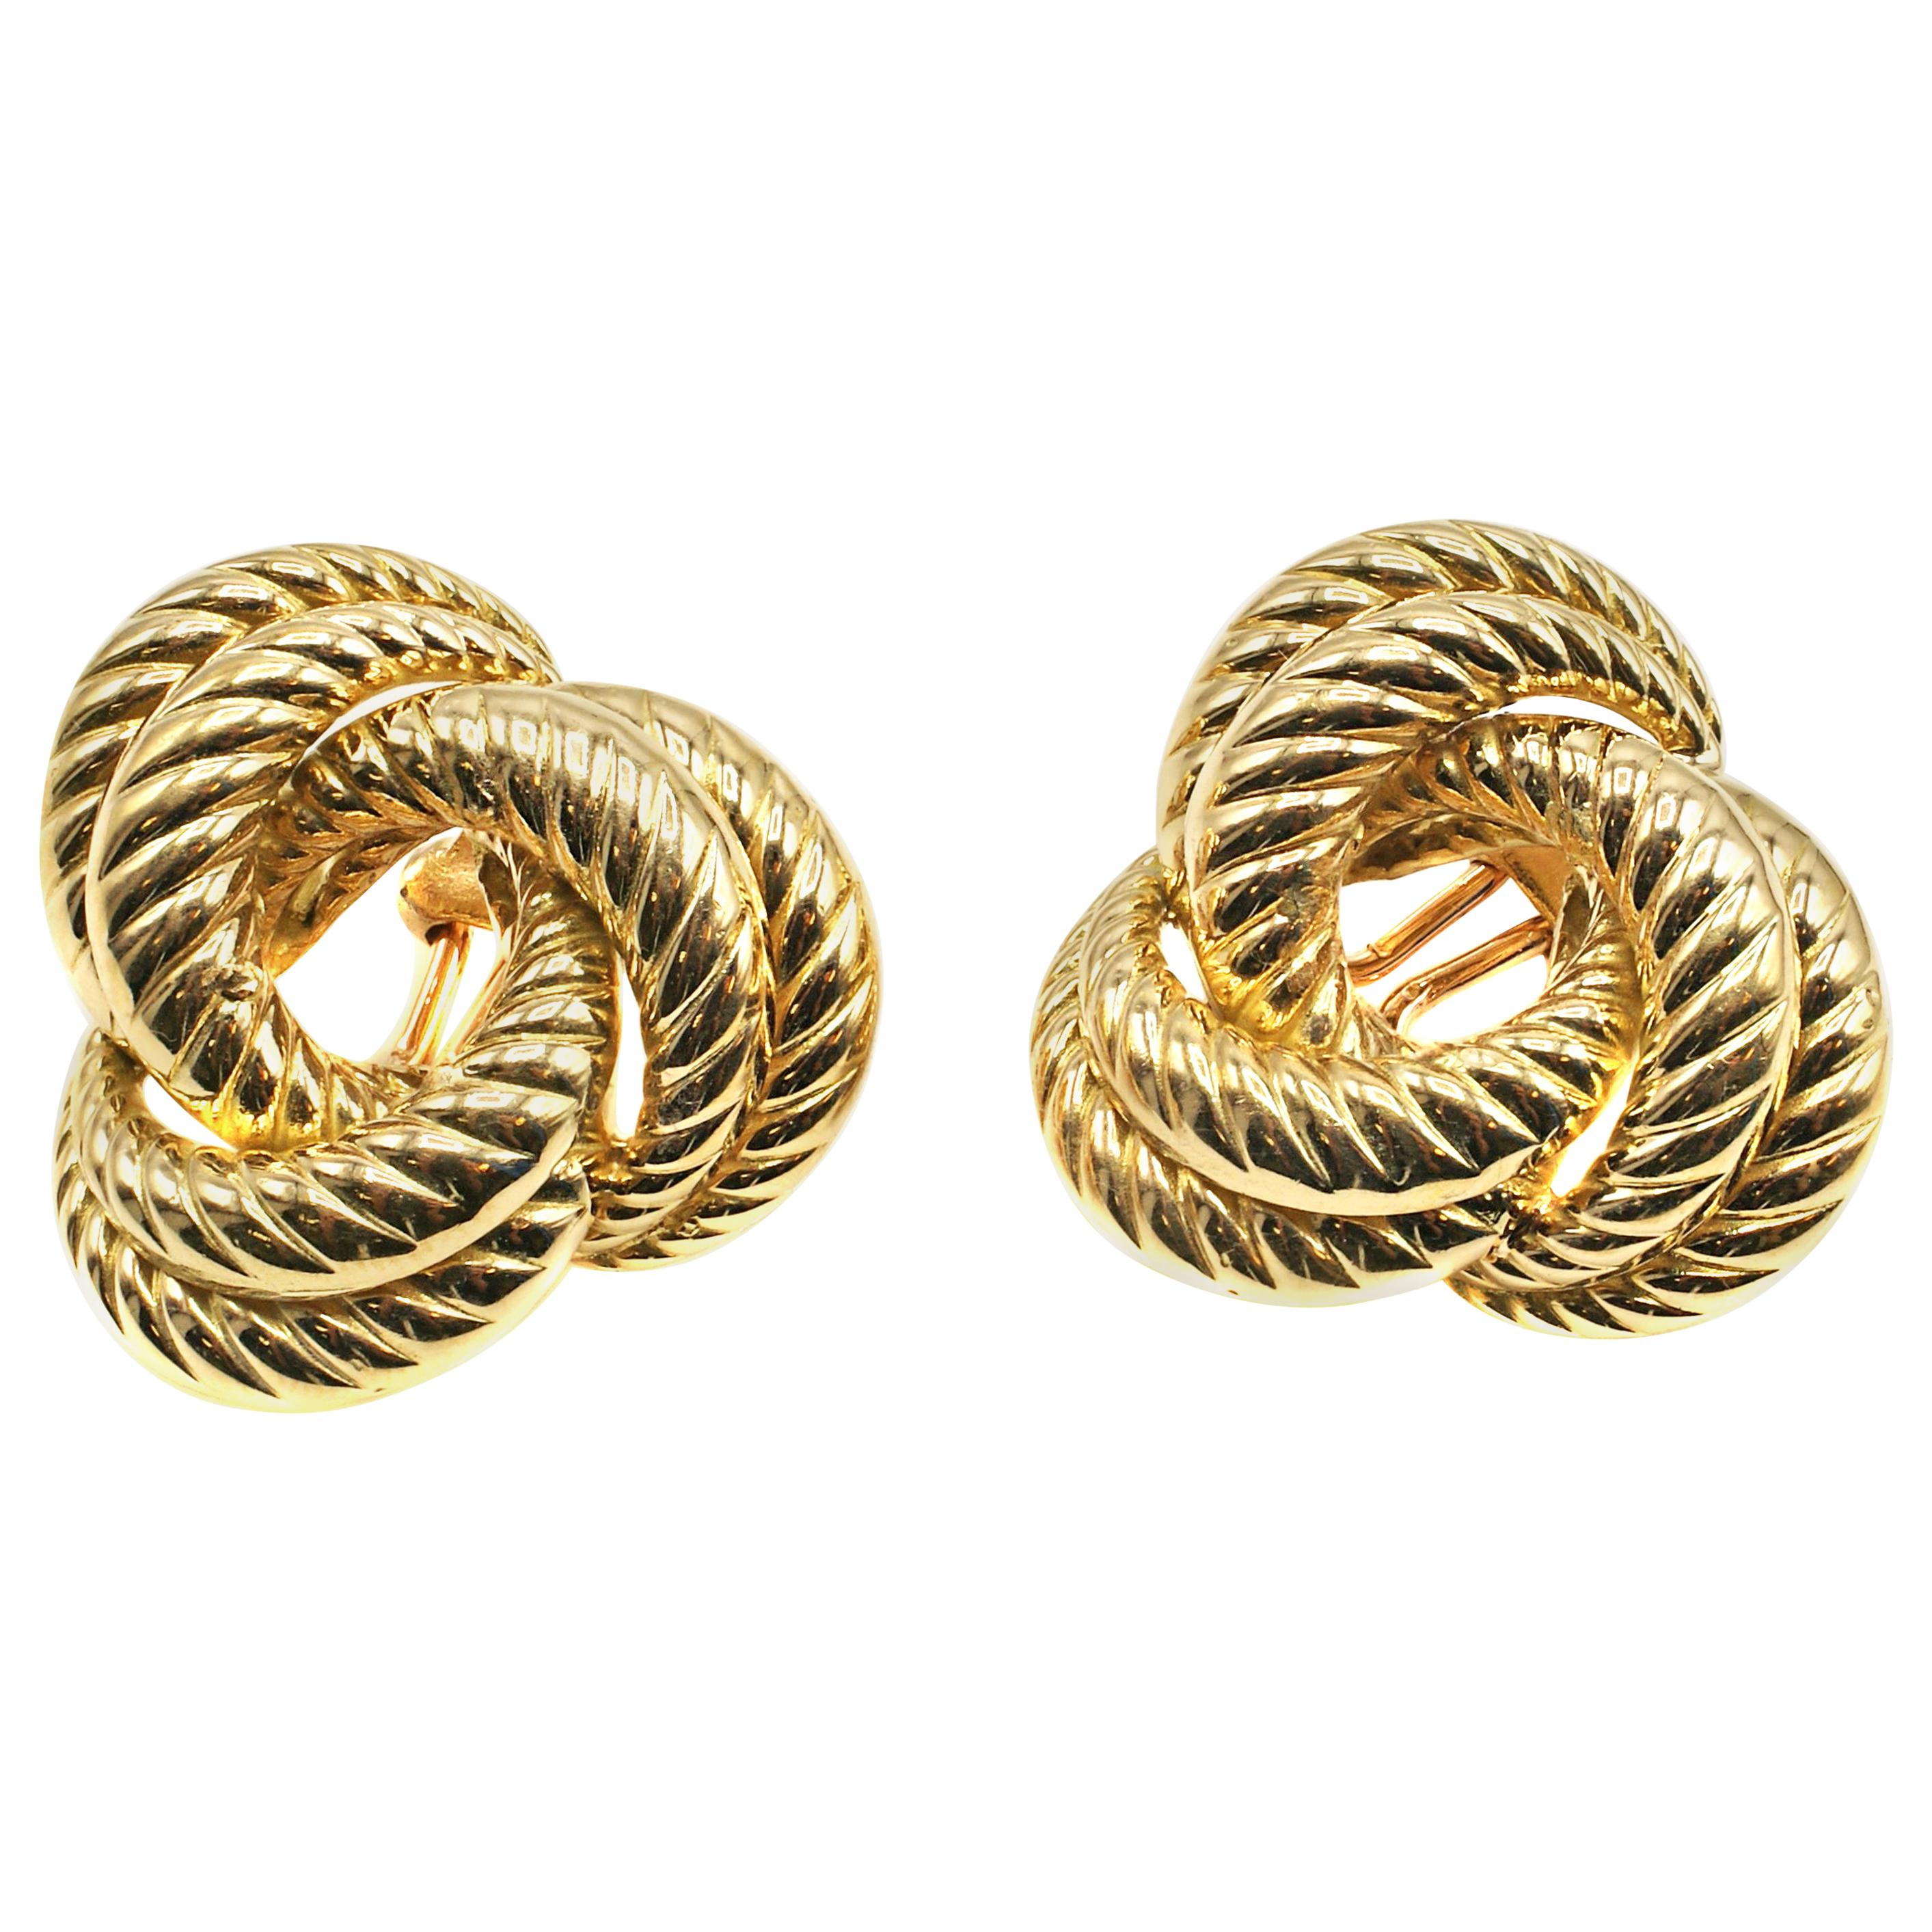 French 18 Karat Gold Twisted Ear Clips